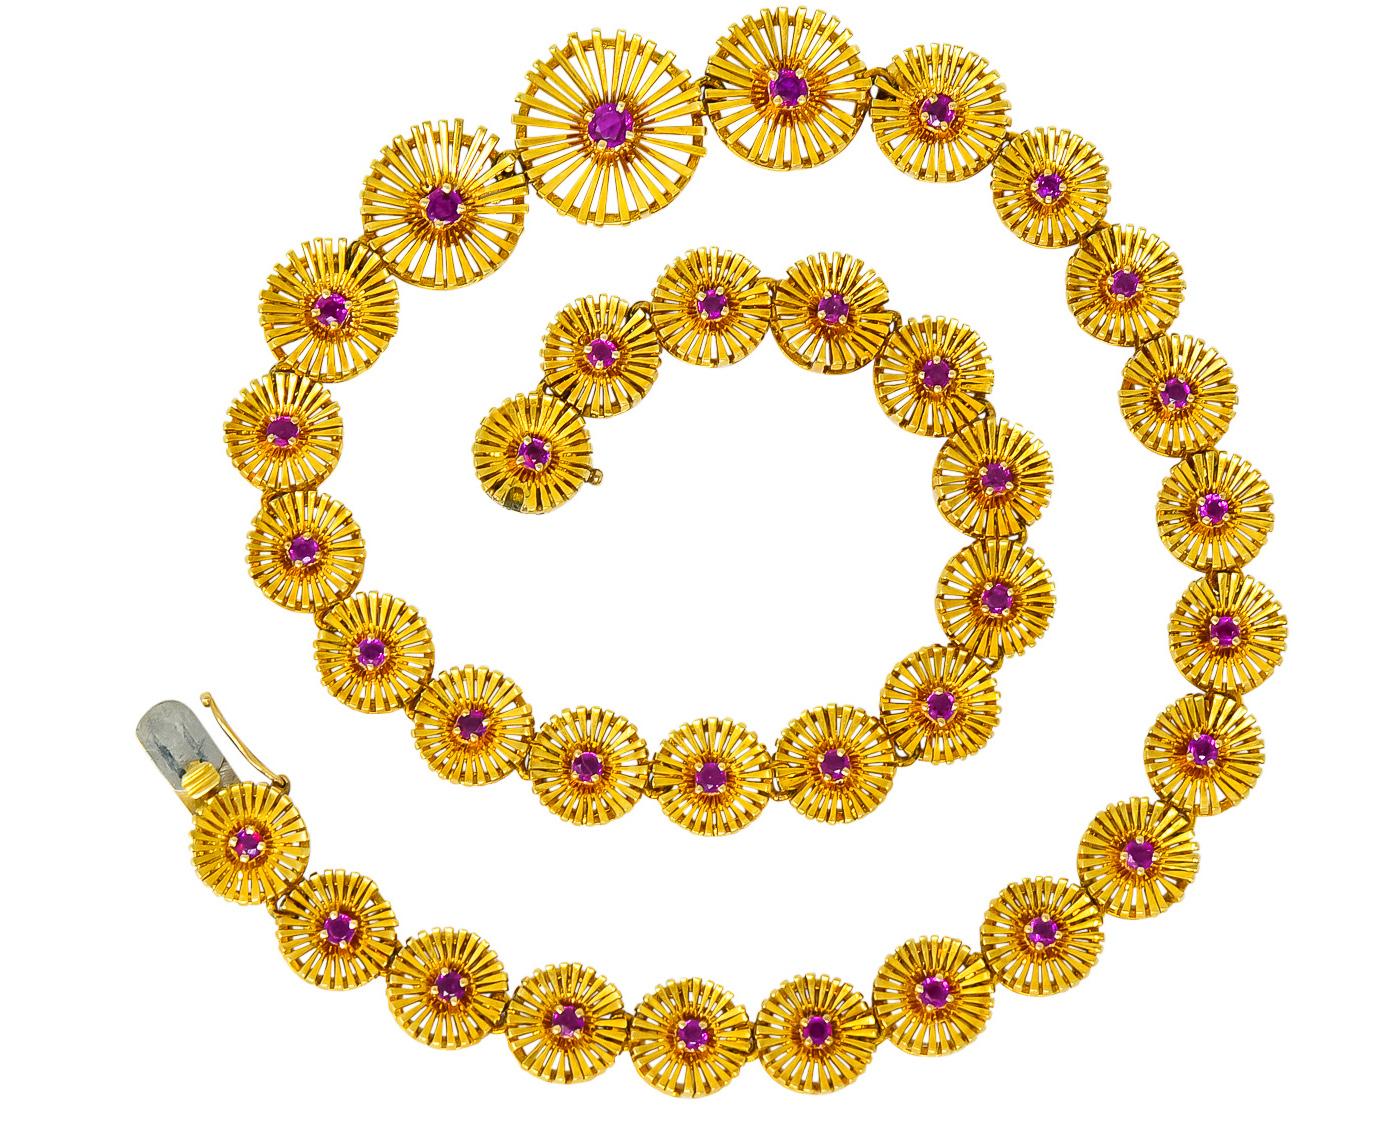 Collar style necklace with graduated flower links designed as radiating disks of polished gold

Each link centering a prong set round ruby, weighing approximately 2.50 carats, transparent pinkish-red in color and very well matched

Completed by